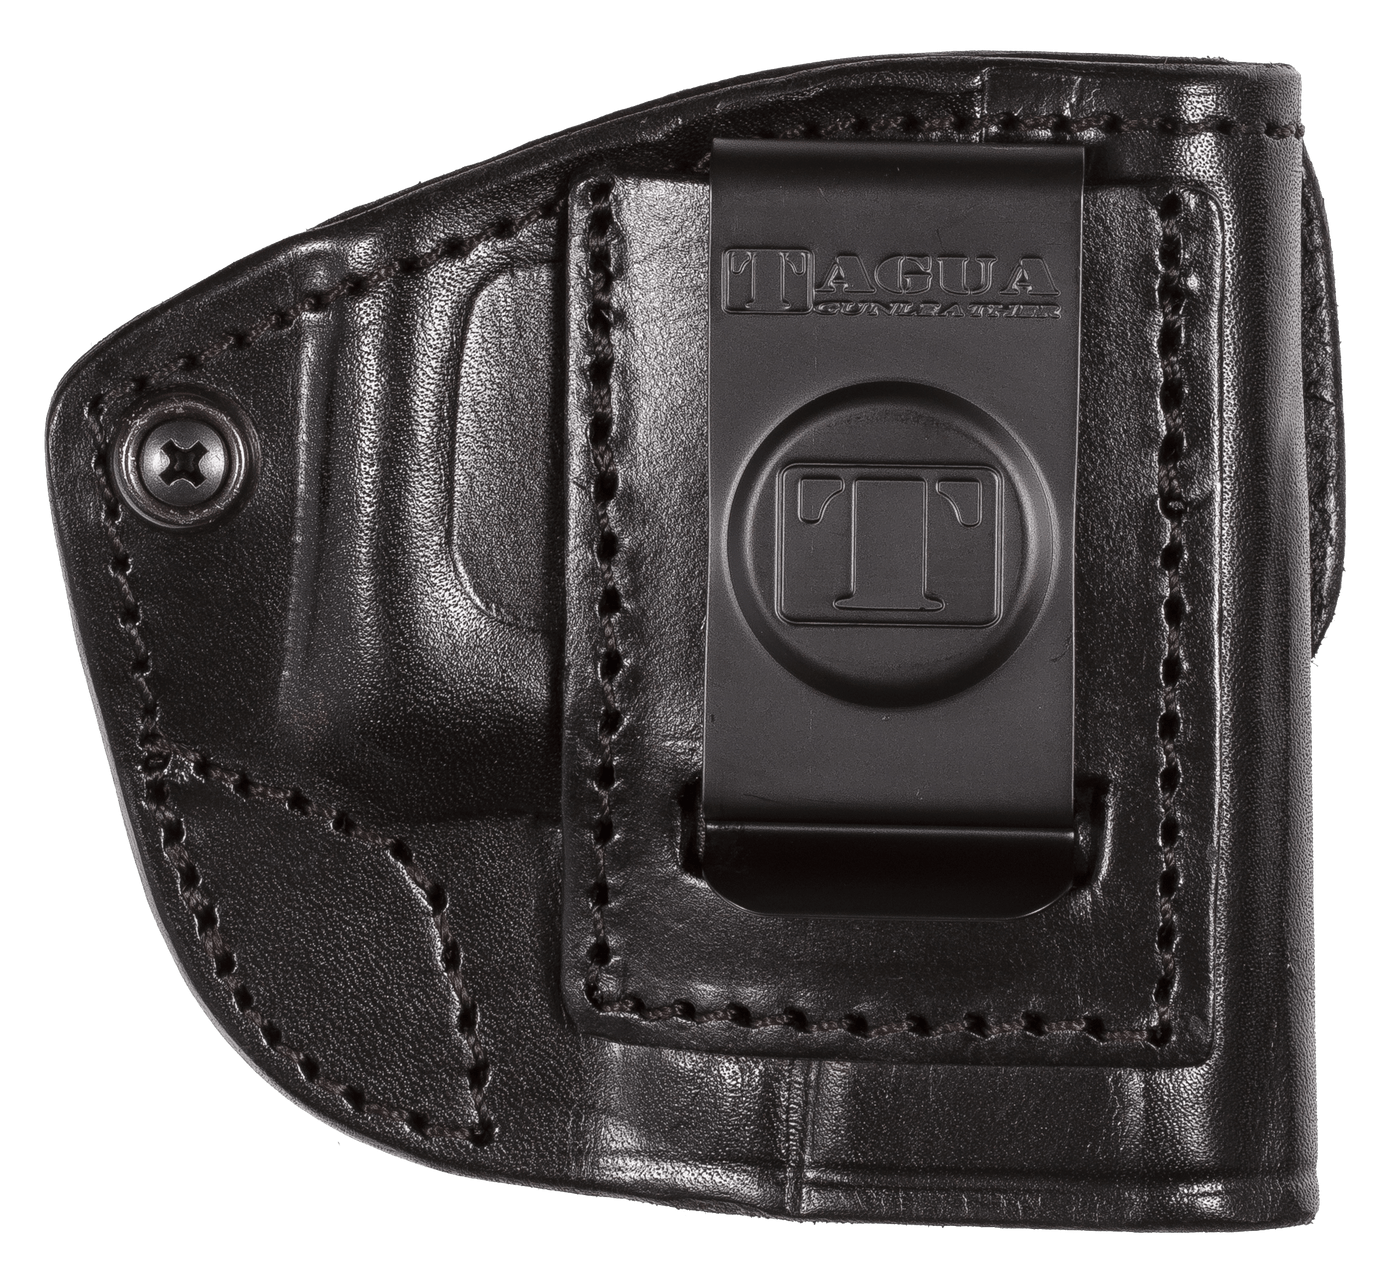 Tagua Tagua 4 In 1 Inside The Pant - Holster Glock 172231 Blk Rh Holsters And Related Items